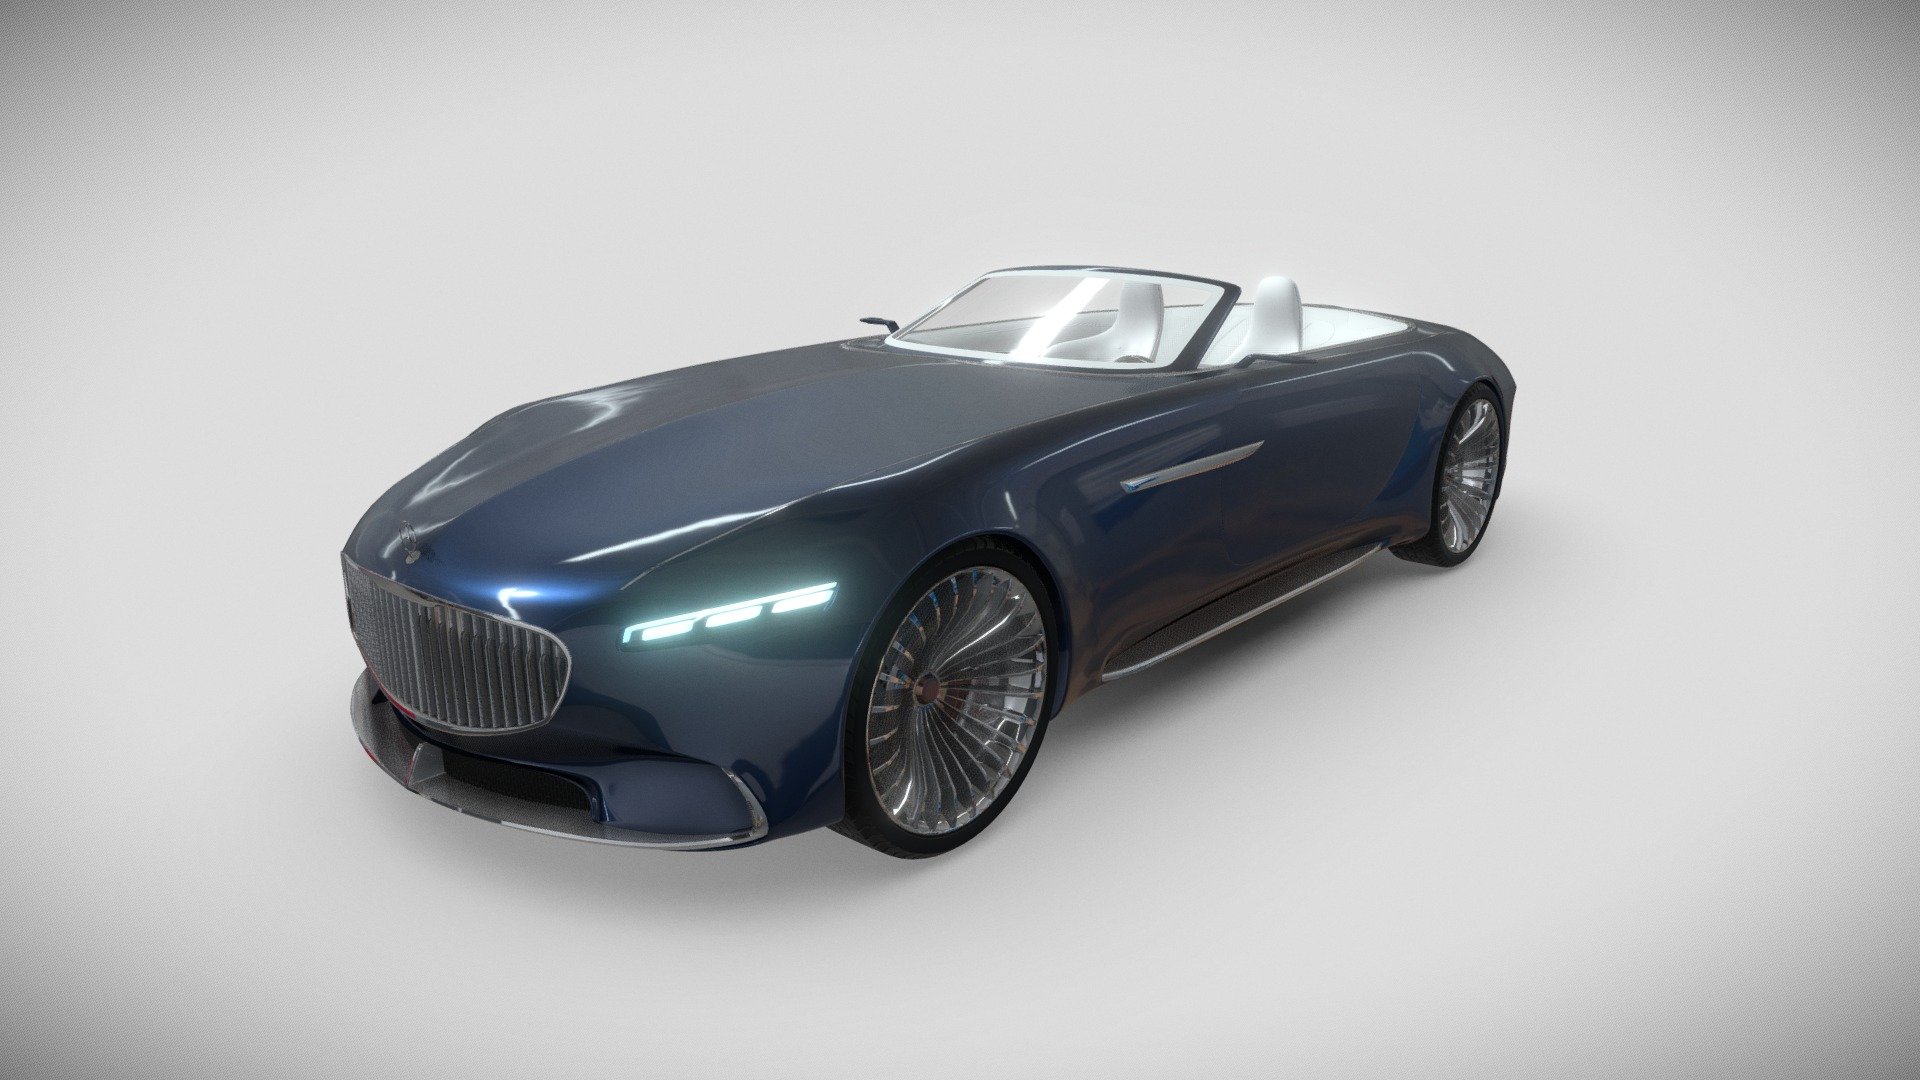 Life-size 3D model of Mercedes-Maybach 6 Cabriolet 2018 concept car with fully modeled and textured interior.

Poly count: 233 847

Measurment system: metric.

All parts presented as separate objects with materials and textures, including tires, and are easy to adjust or modify (e.g. color, color of lights and backlighting, roughness level etc.)

Interior is fully modeled and textured according to real-life references with extra attention to detail. PBR textures include: Albedo, Metallness, Roughness, Specular, Normal and Emission.

Photo-realistic car paint material with freznel and microscopic bumps.

All textures are packed into a .blend file &amp; a separate folder

Available formats: .blend (native), .fbx, .obj, .mtl, .gltf, .glb

There are no surface imperfections on textures as if a car is cleaned and polished for a display.

Rendered in ray-tracing Cycles engine. Custom HDRI and environment are not included in the final product.

No plug-ins required 3d model